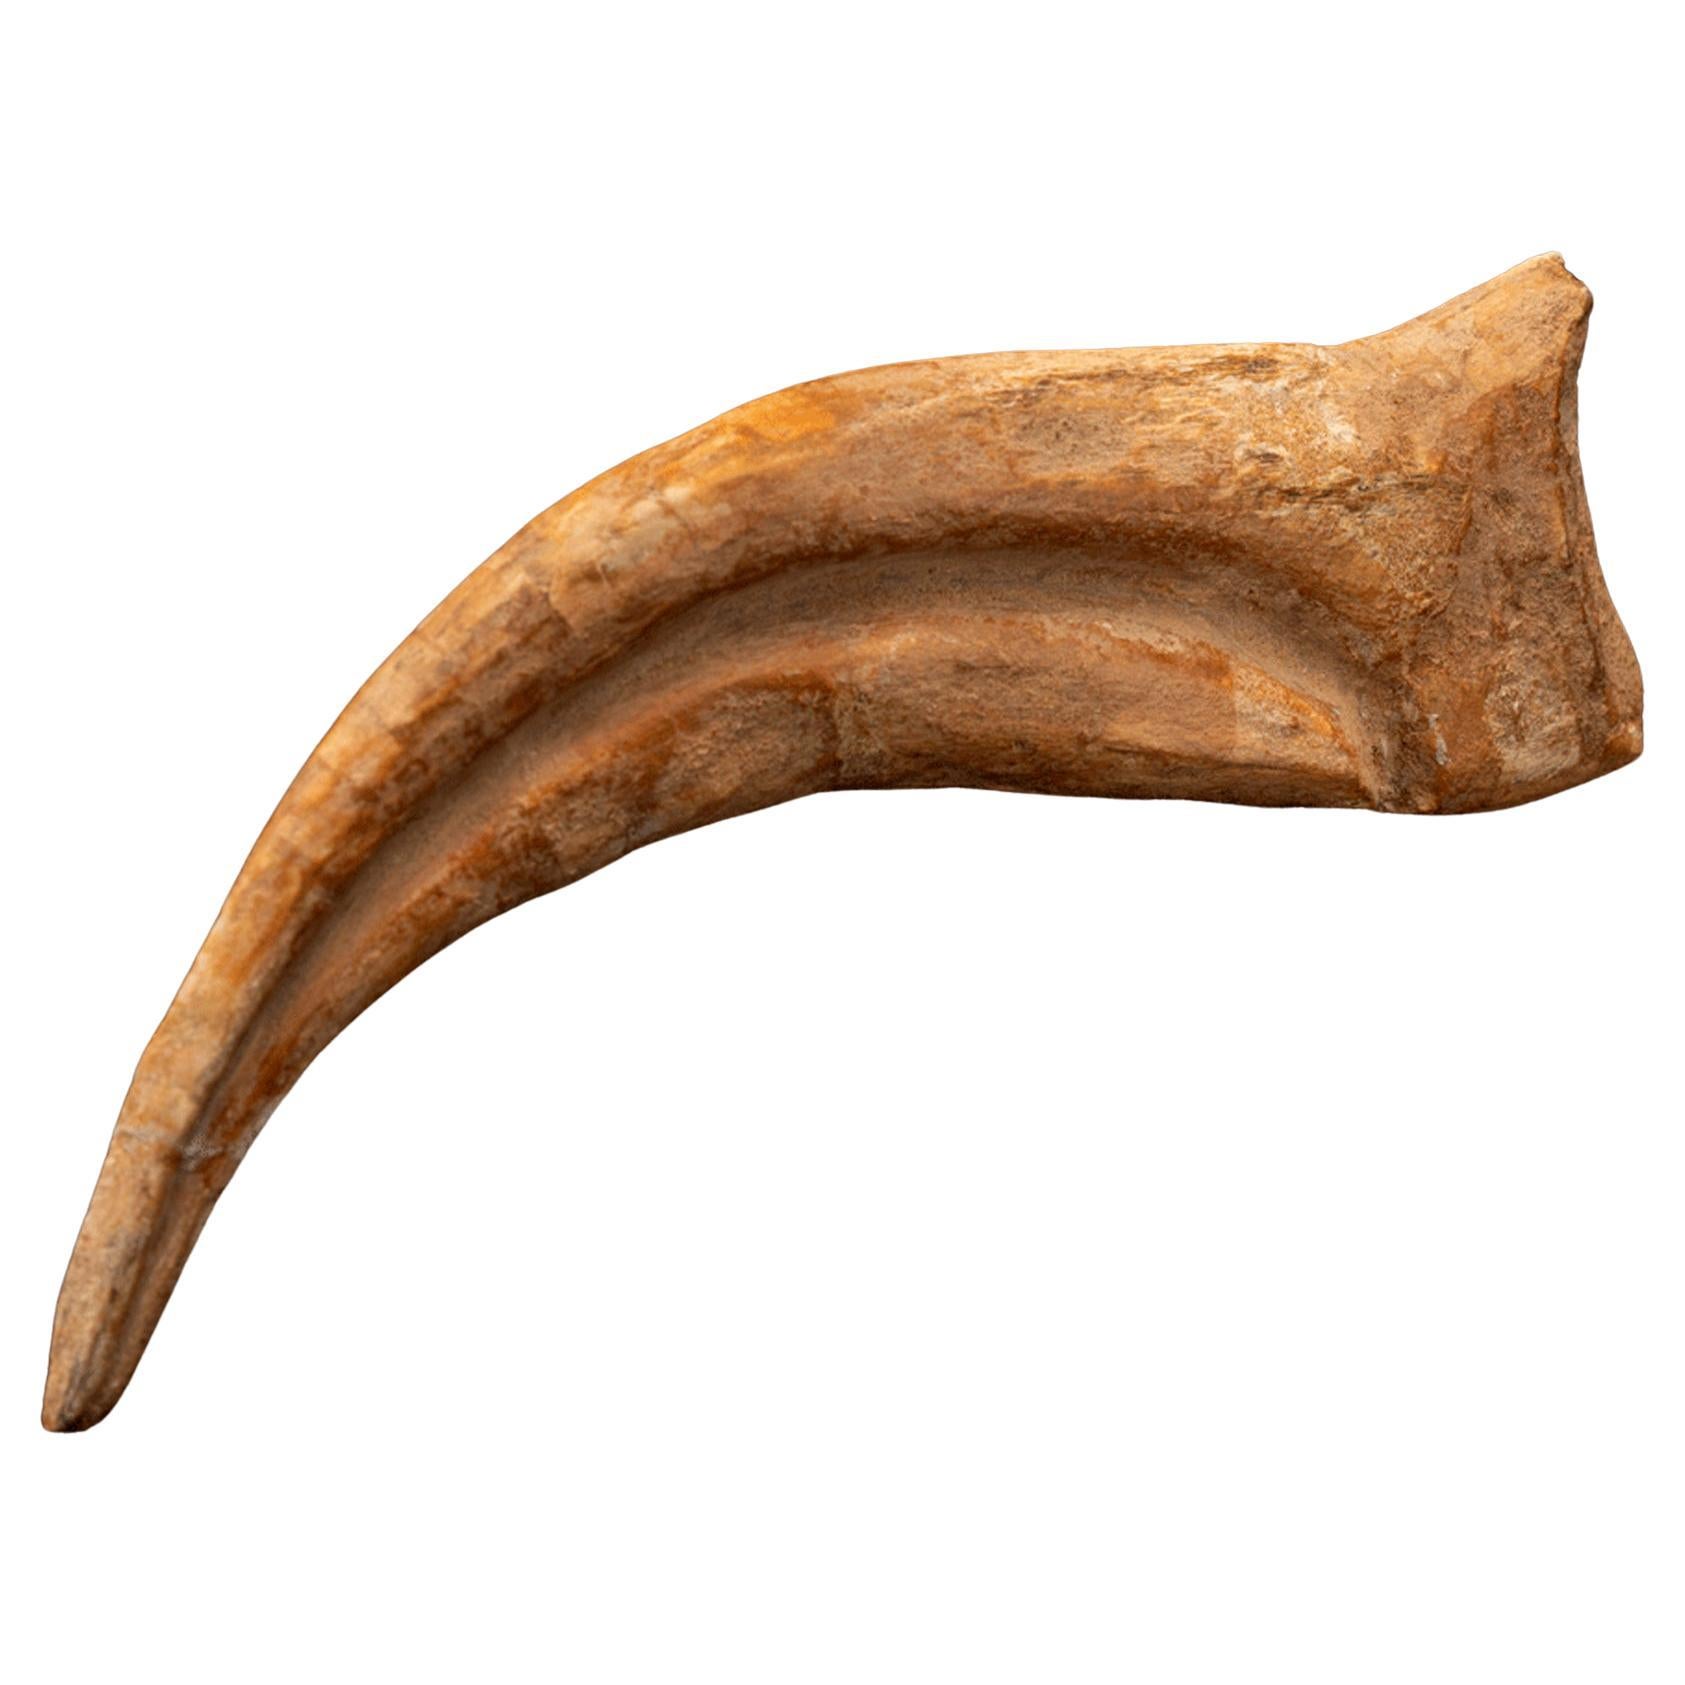 Spinosaurus Hand Claw // 6-3/8" Long // Cretaceous Period